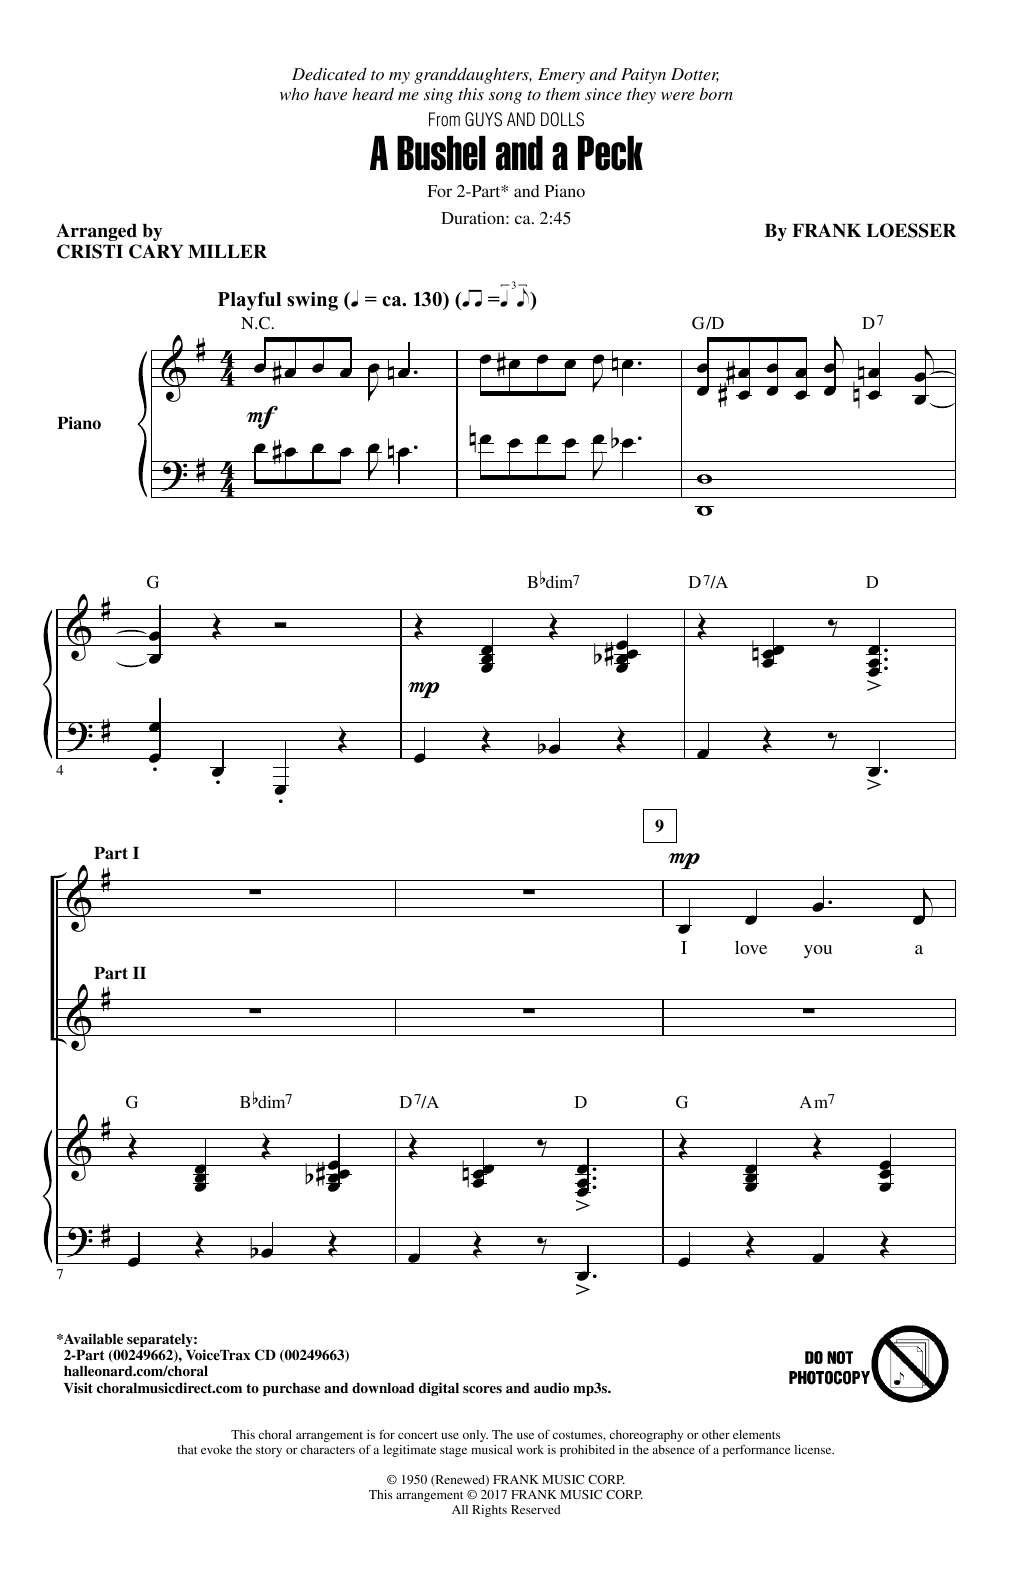 Cristi Cary Miller A Bushel And A Peck sheet music notes and chords. Download Printable PDF.